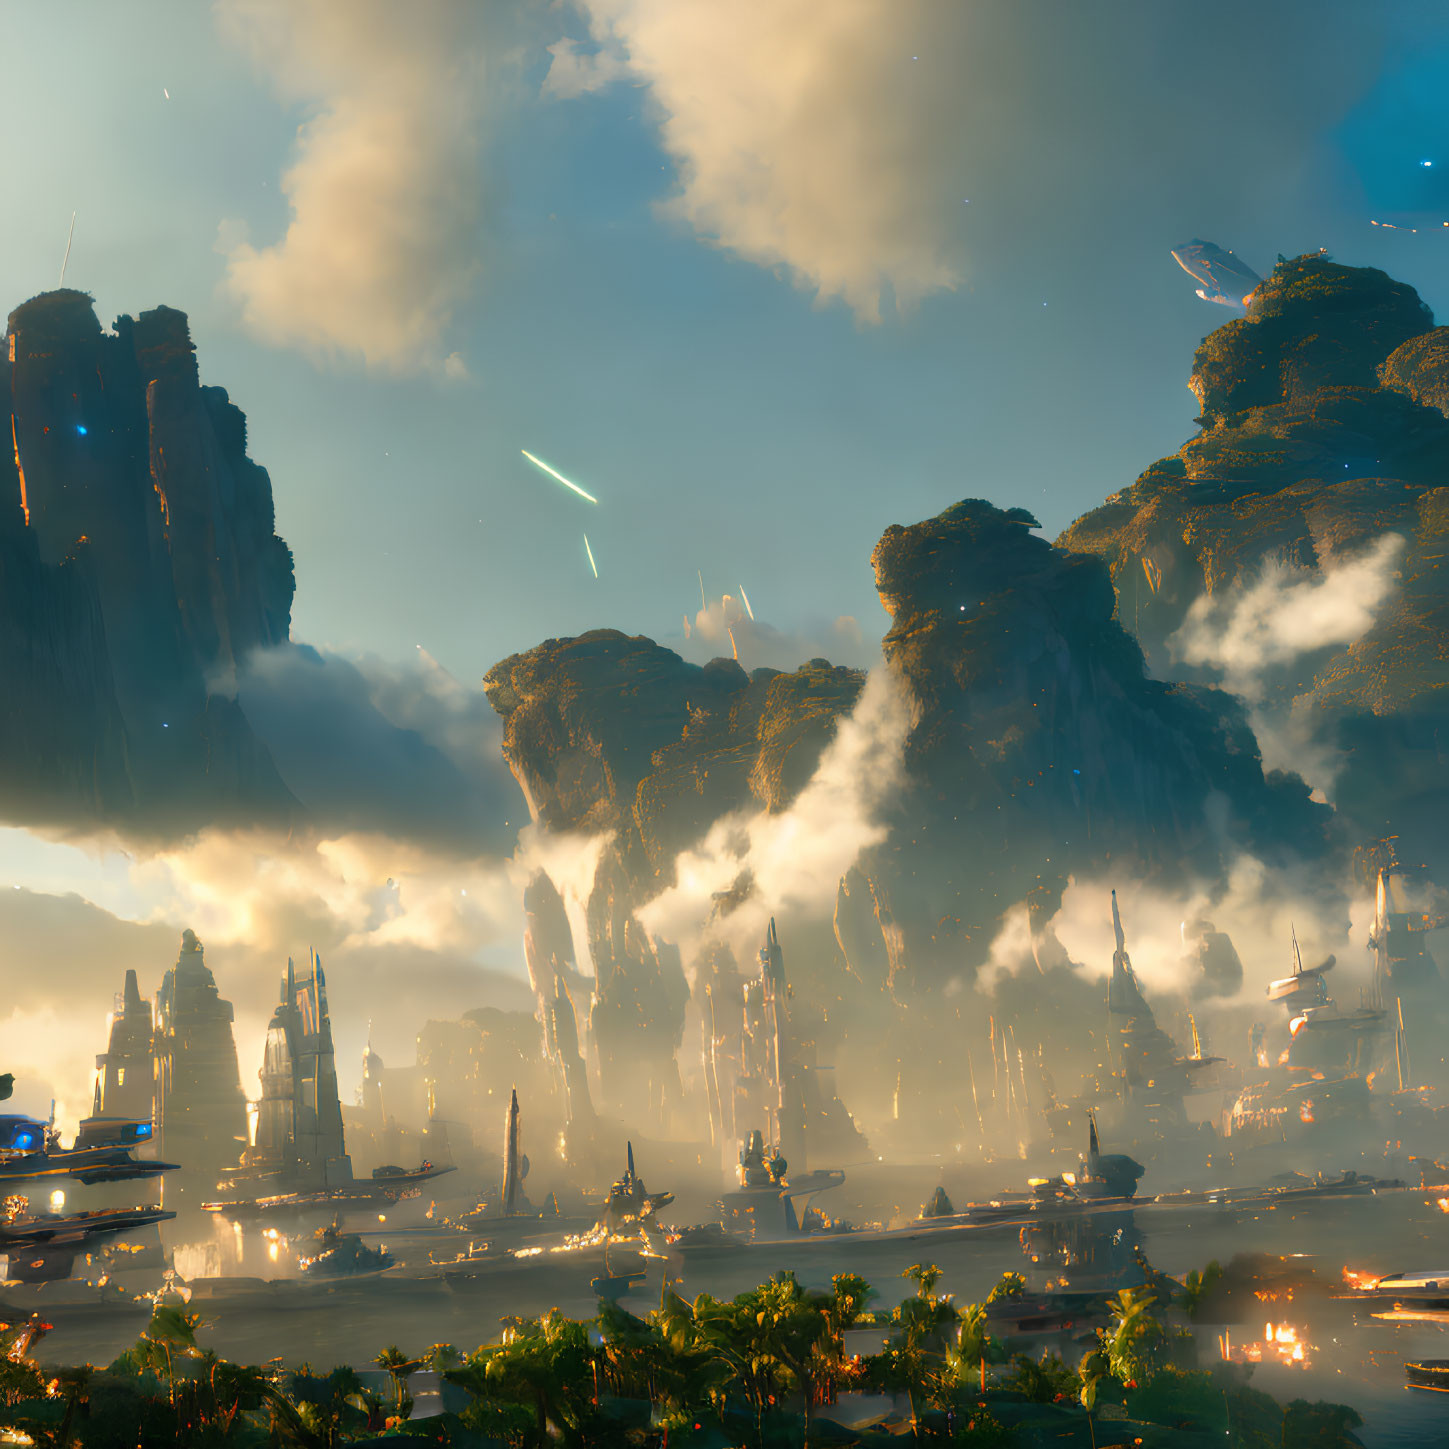 Futuristic cityscape with rock formations, advanced buildings, and flying vehicles under orange sky